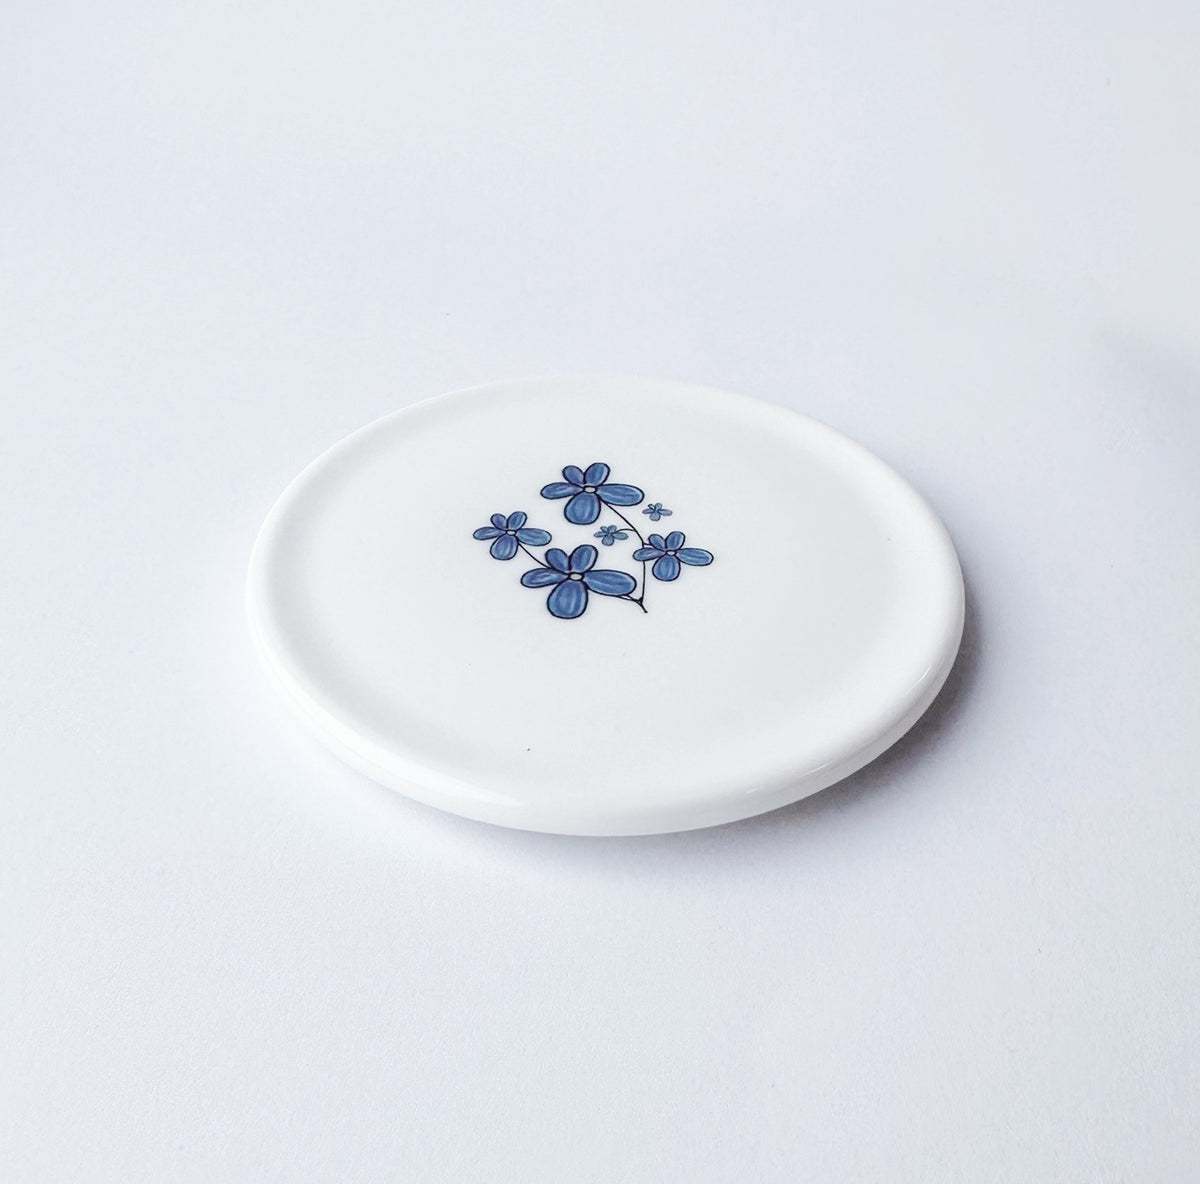 Forget-me-not coaster